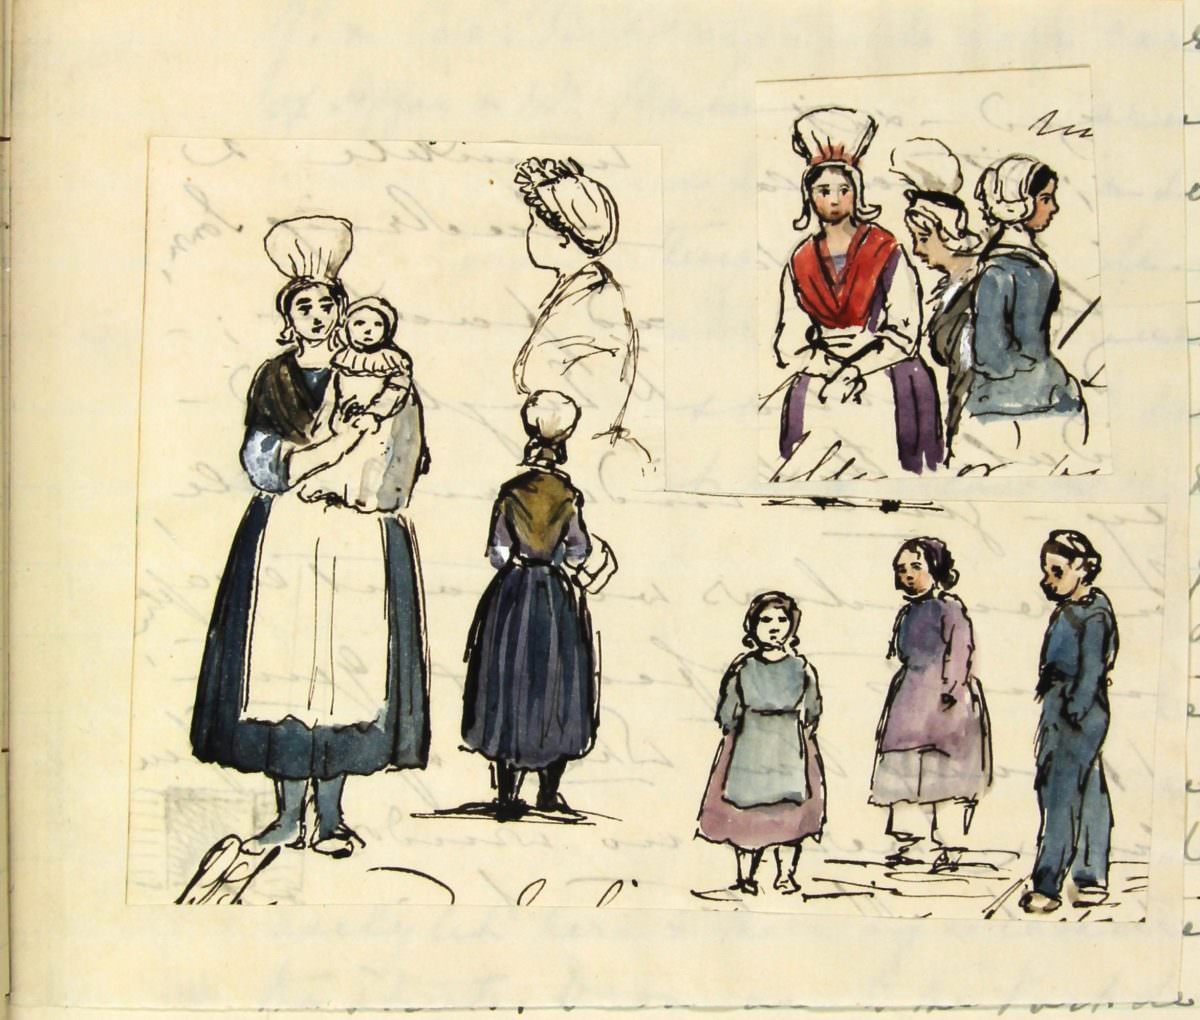 Tuesday 18th August 1857 Women and children of Cherbourg- pen and ink sketches with watercolour, by Queen Victoria